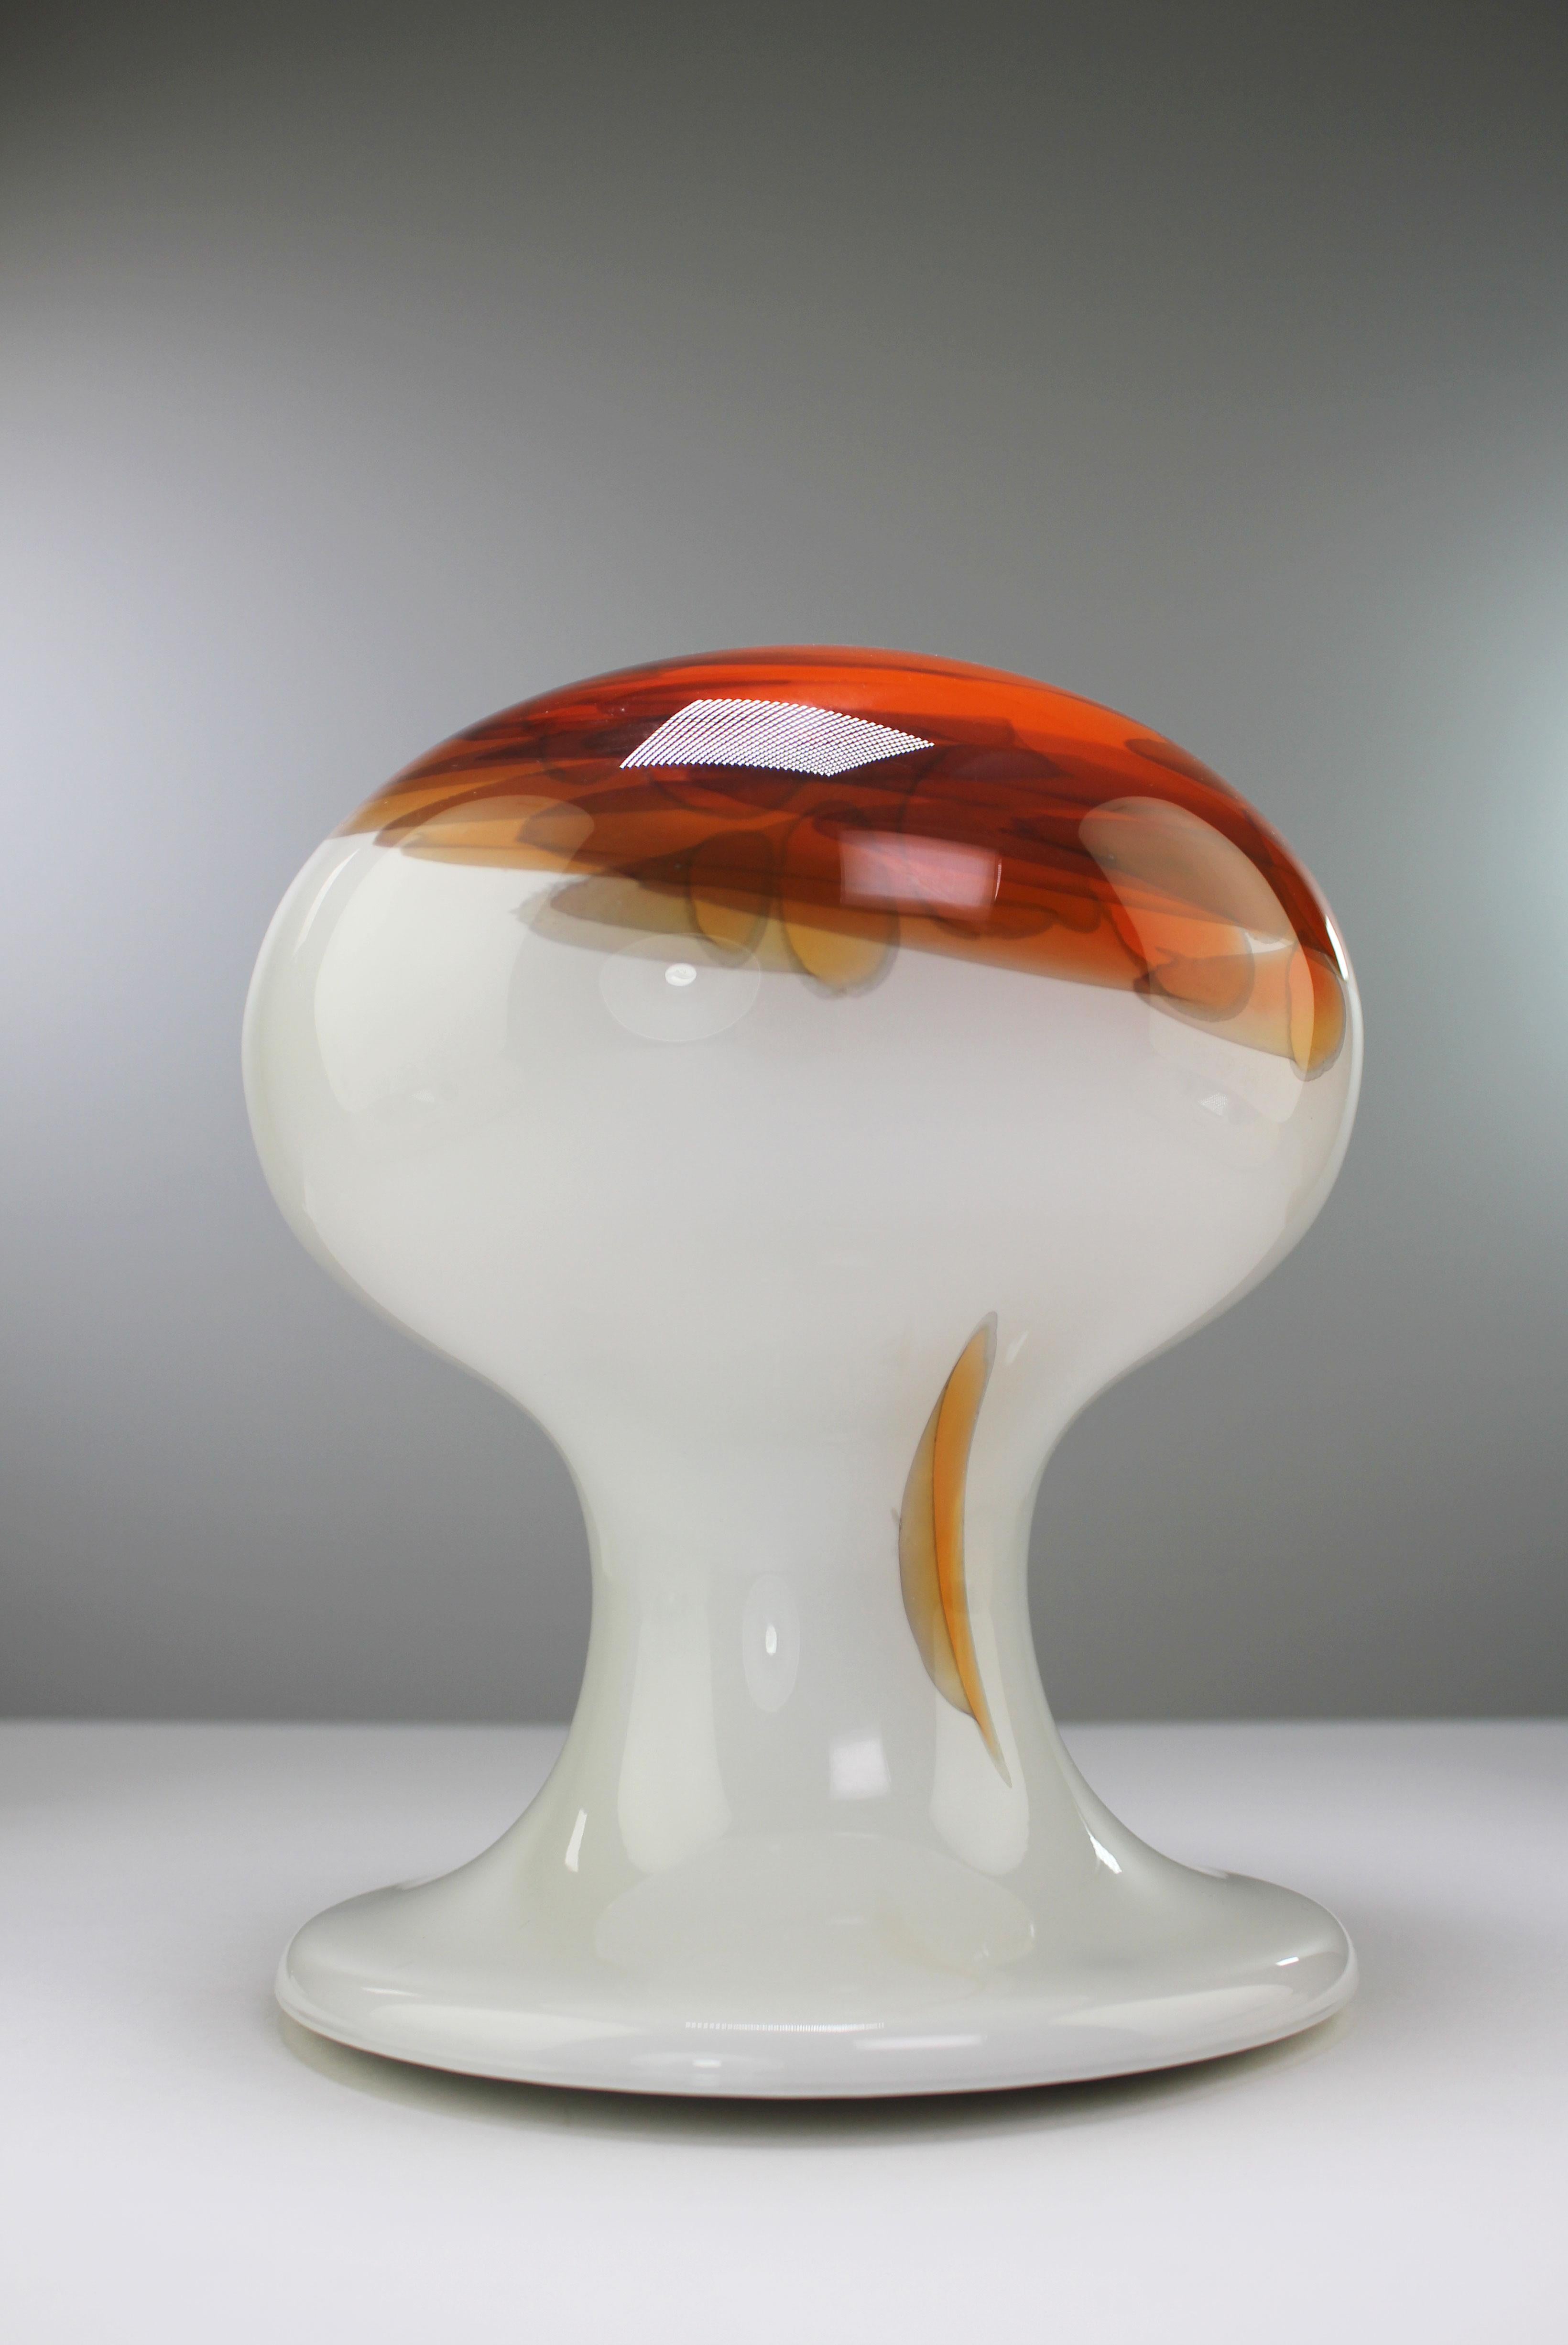 Unique, mouthblown Danish Mid-Century Modern mushroom shaped mouth blown art glass table lamp with organic decorations by Danish glass designer Per Lütken. Opaline bone white glass with orange, red and yellow fiery color accents. Manufactured in the